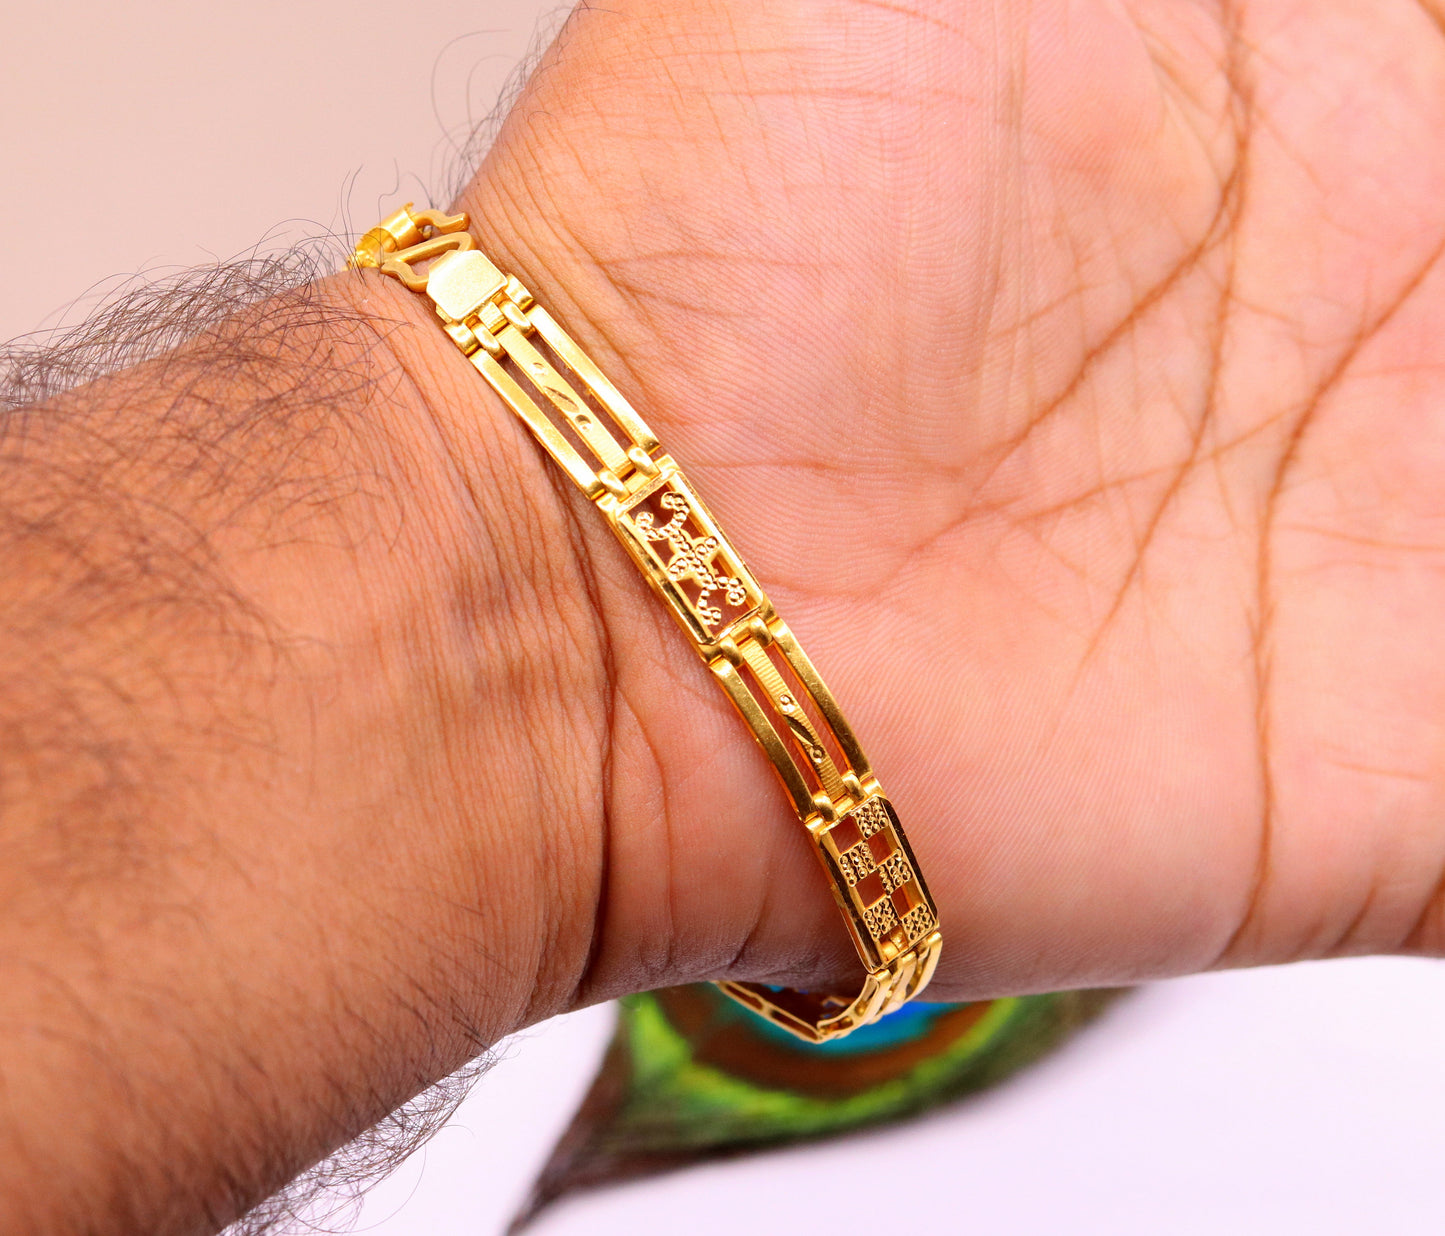 Authentic 22kt yellow gold handmade stylish solid flexible bracelet unisex top class  gifting from Rajasthan india - TRIBAL ORNAMENTS